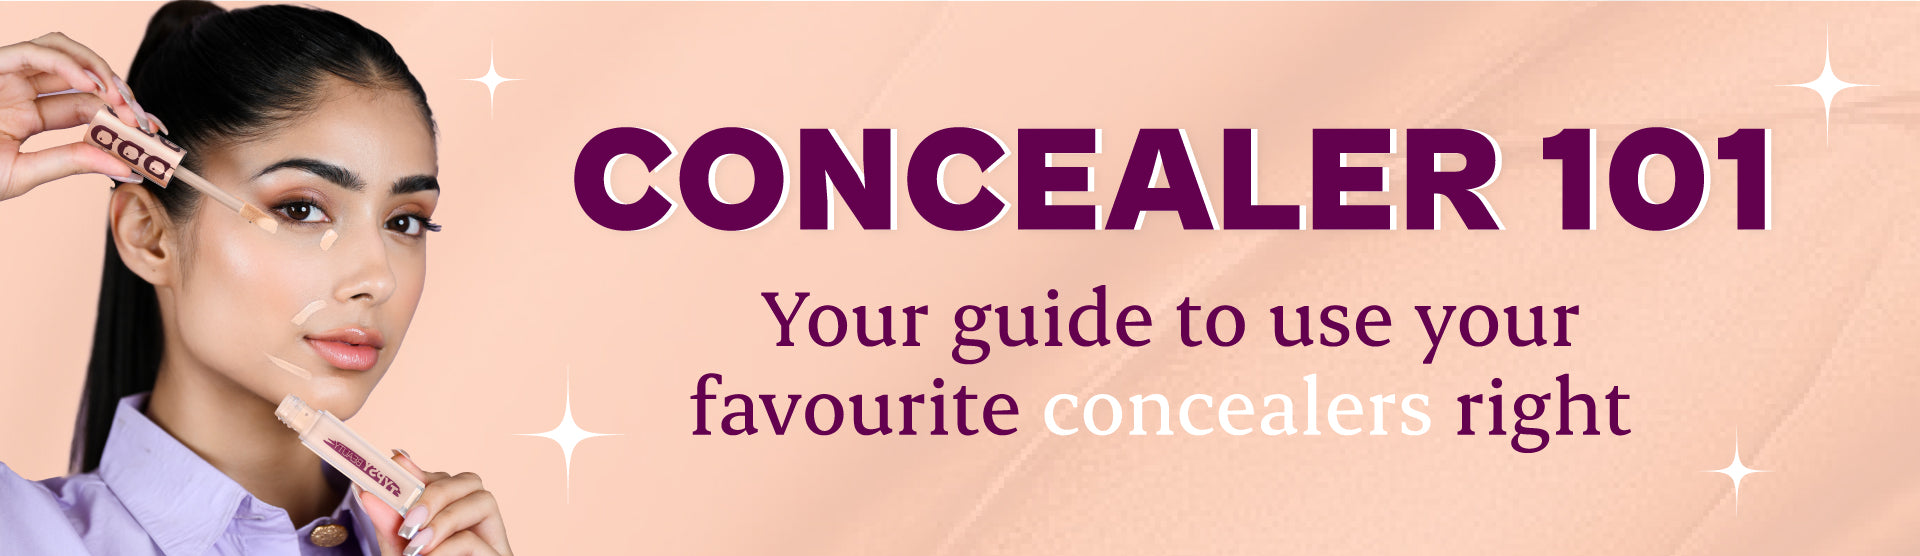 How to Use Concealer to Contour and Highlight Your Face